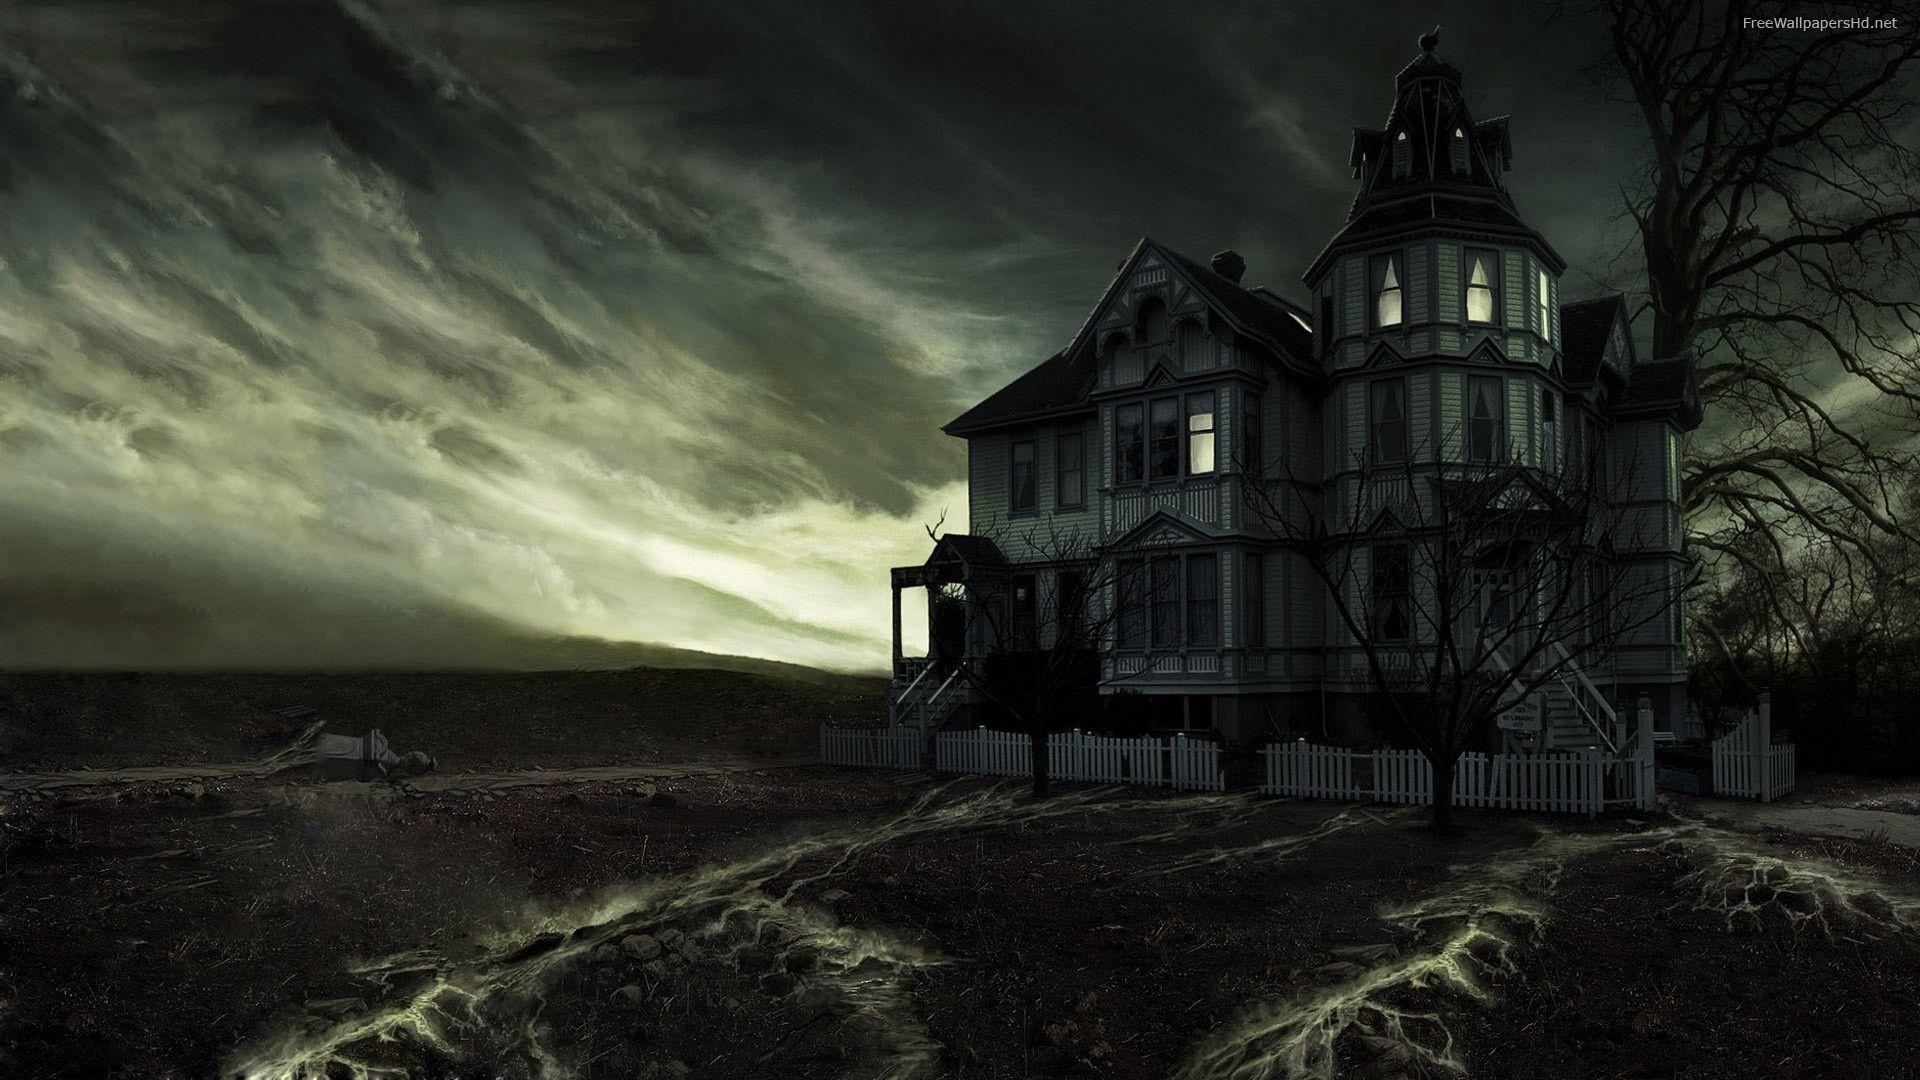 Wallpaper For > Haunted House Wallpaper HD